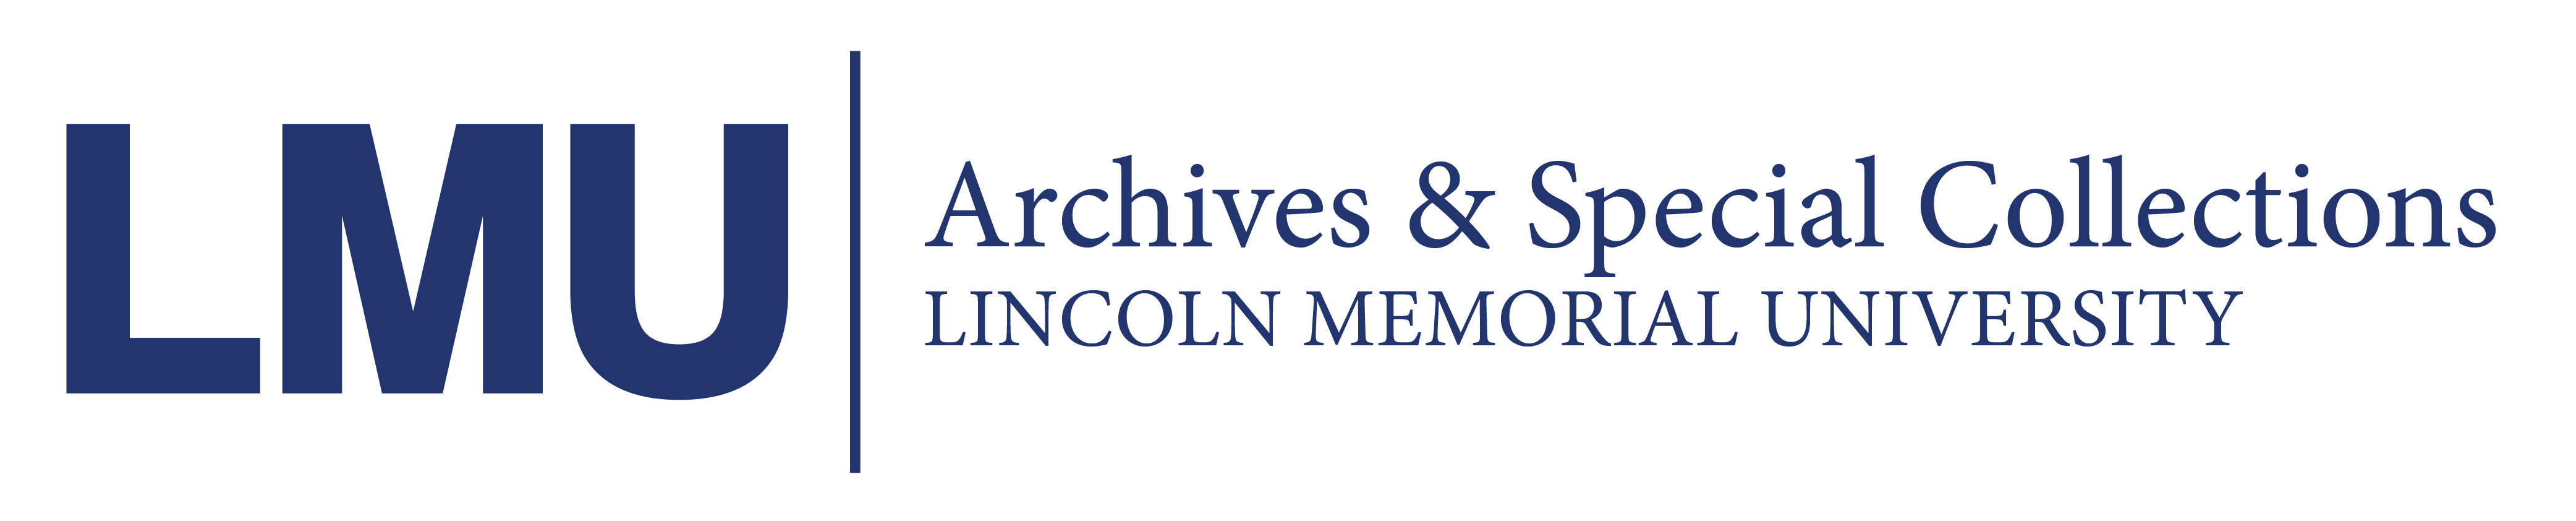 Welcome to the Archives of Lincoln Memorial University